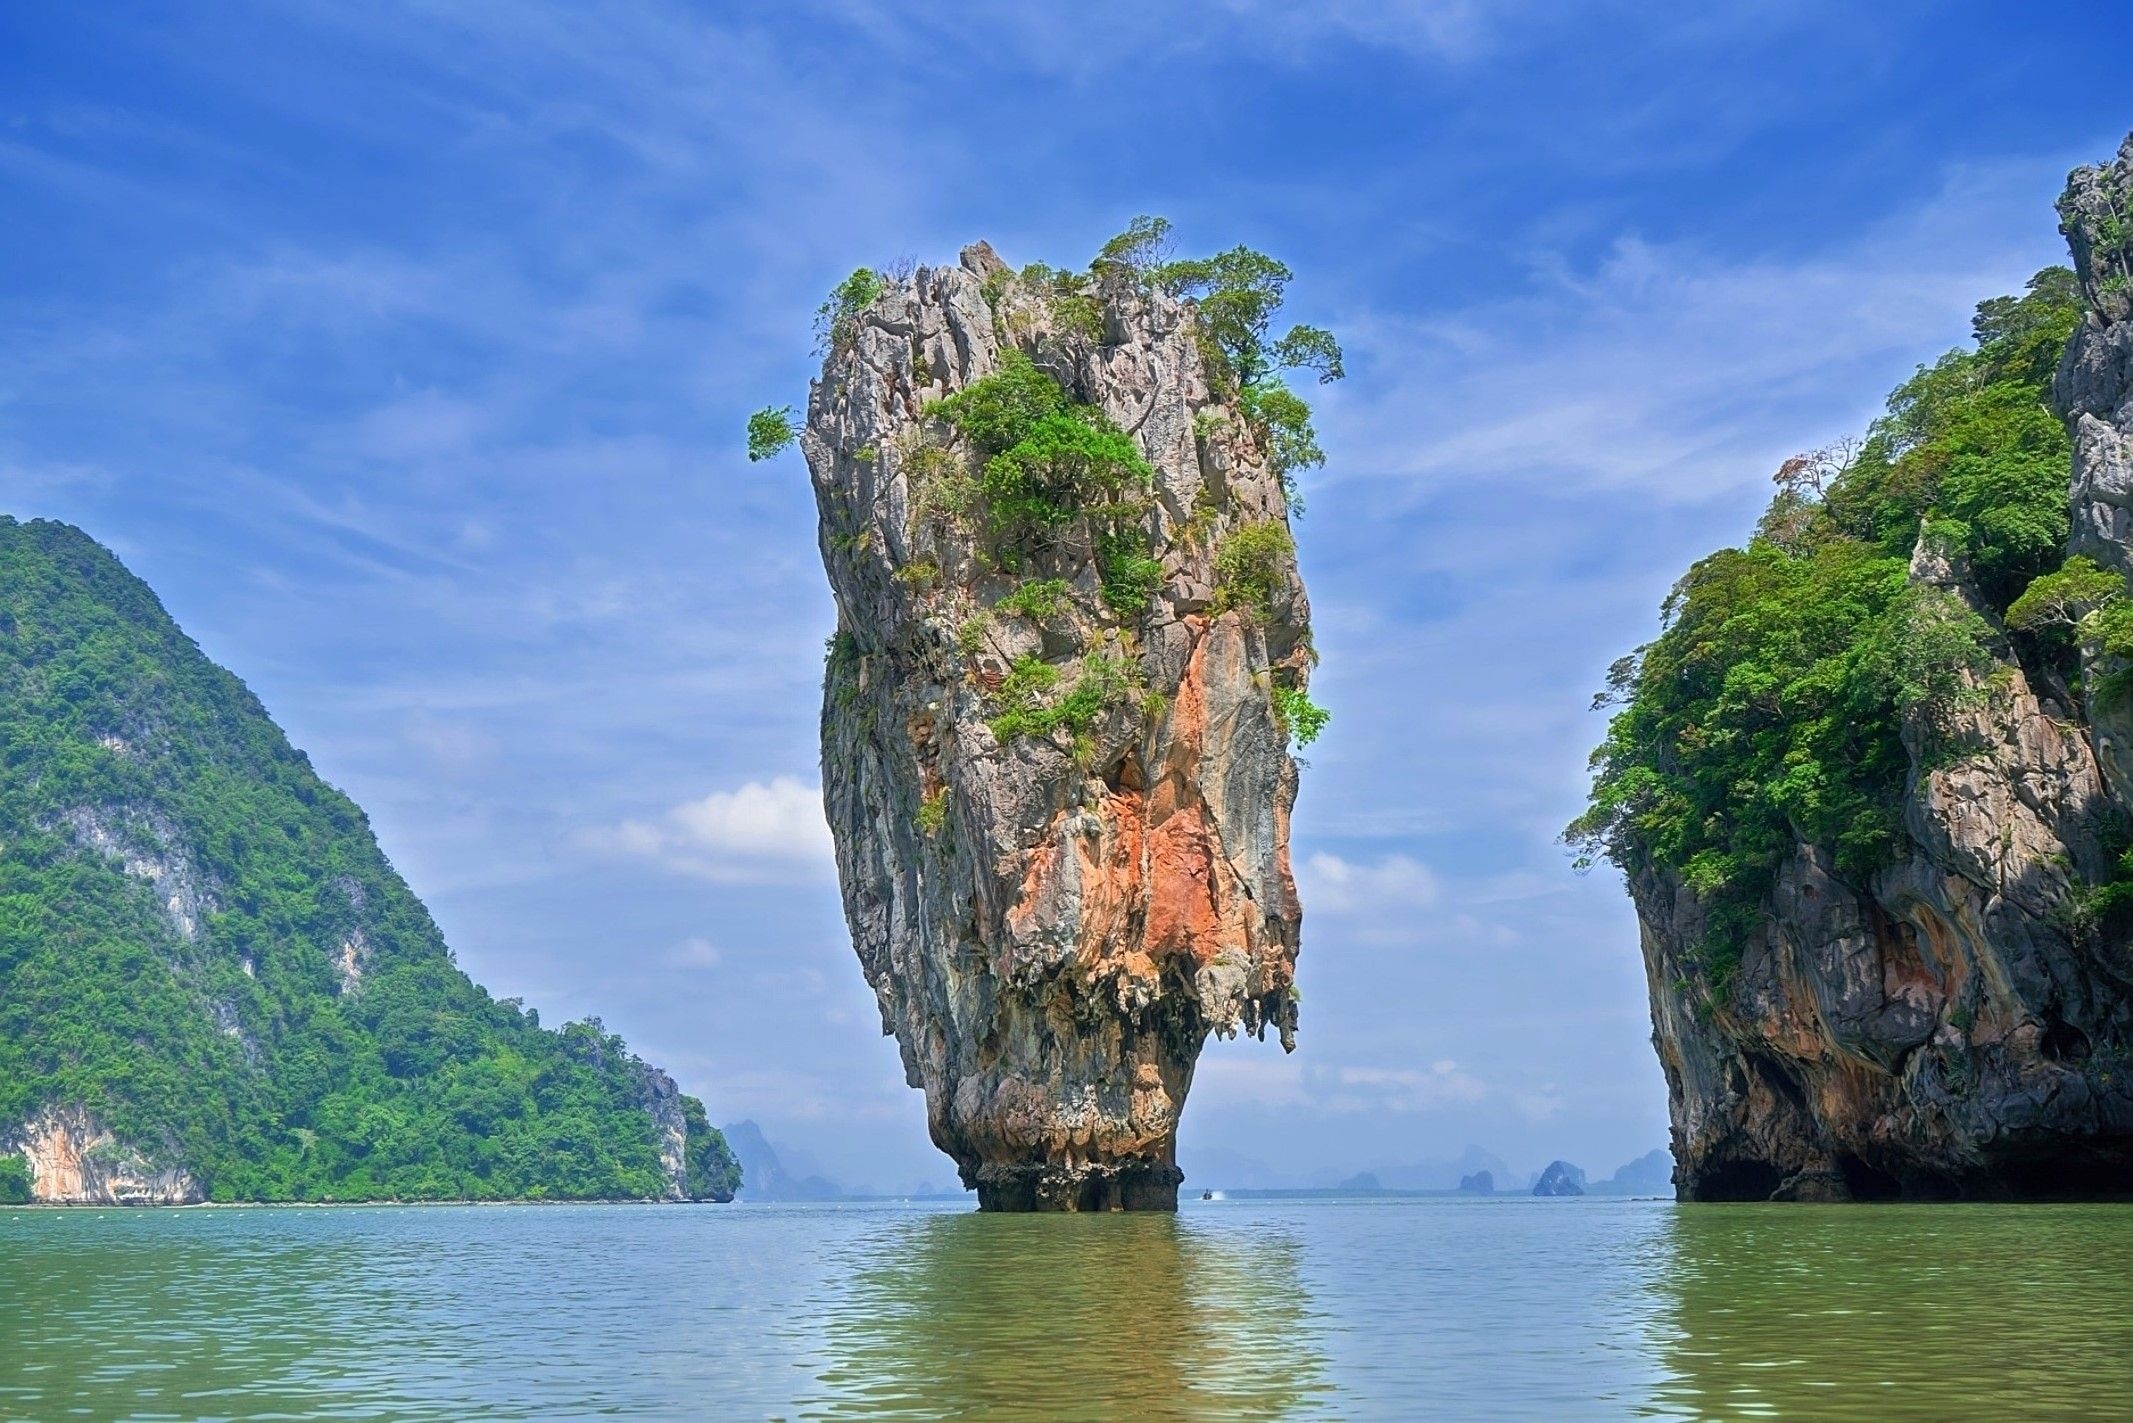 Khao Phing Kan, Free download images, Travel inspiration, Insta-worthy shots, 2140x1430 HD Desktop